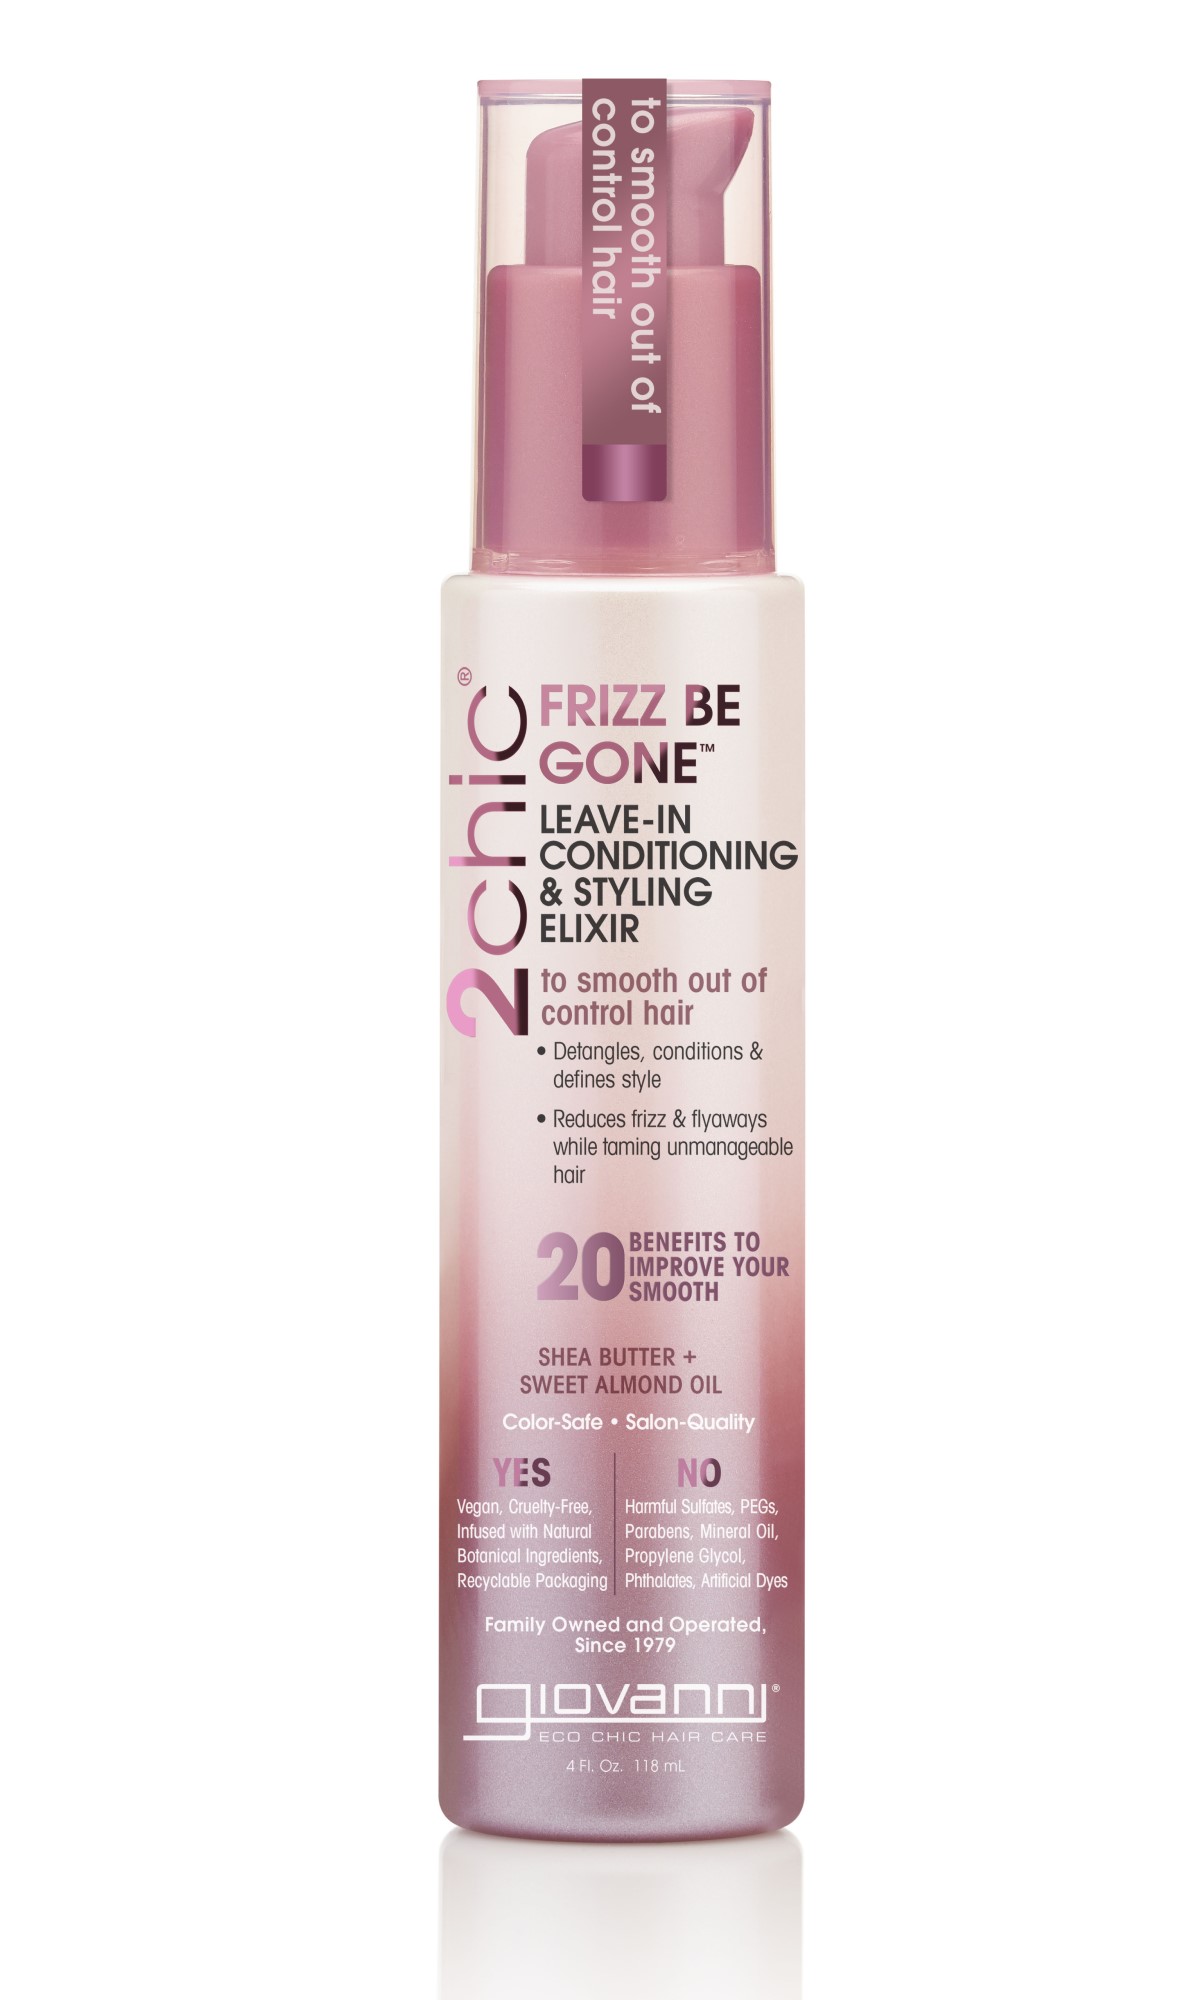 2chic® FRIZZ BE GONE™ LEAVE-IN CONDITIONING & STYLING ELIXIR